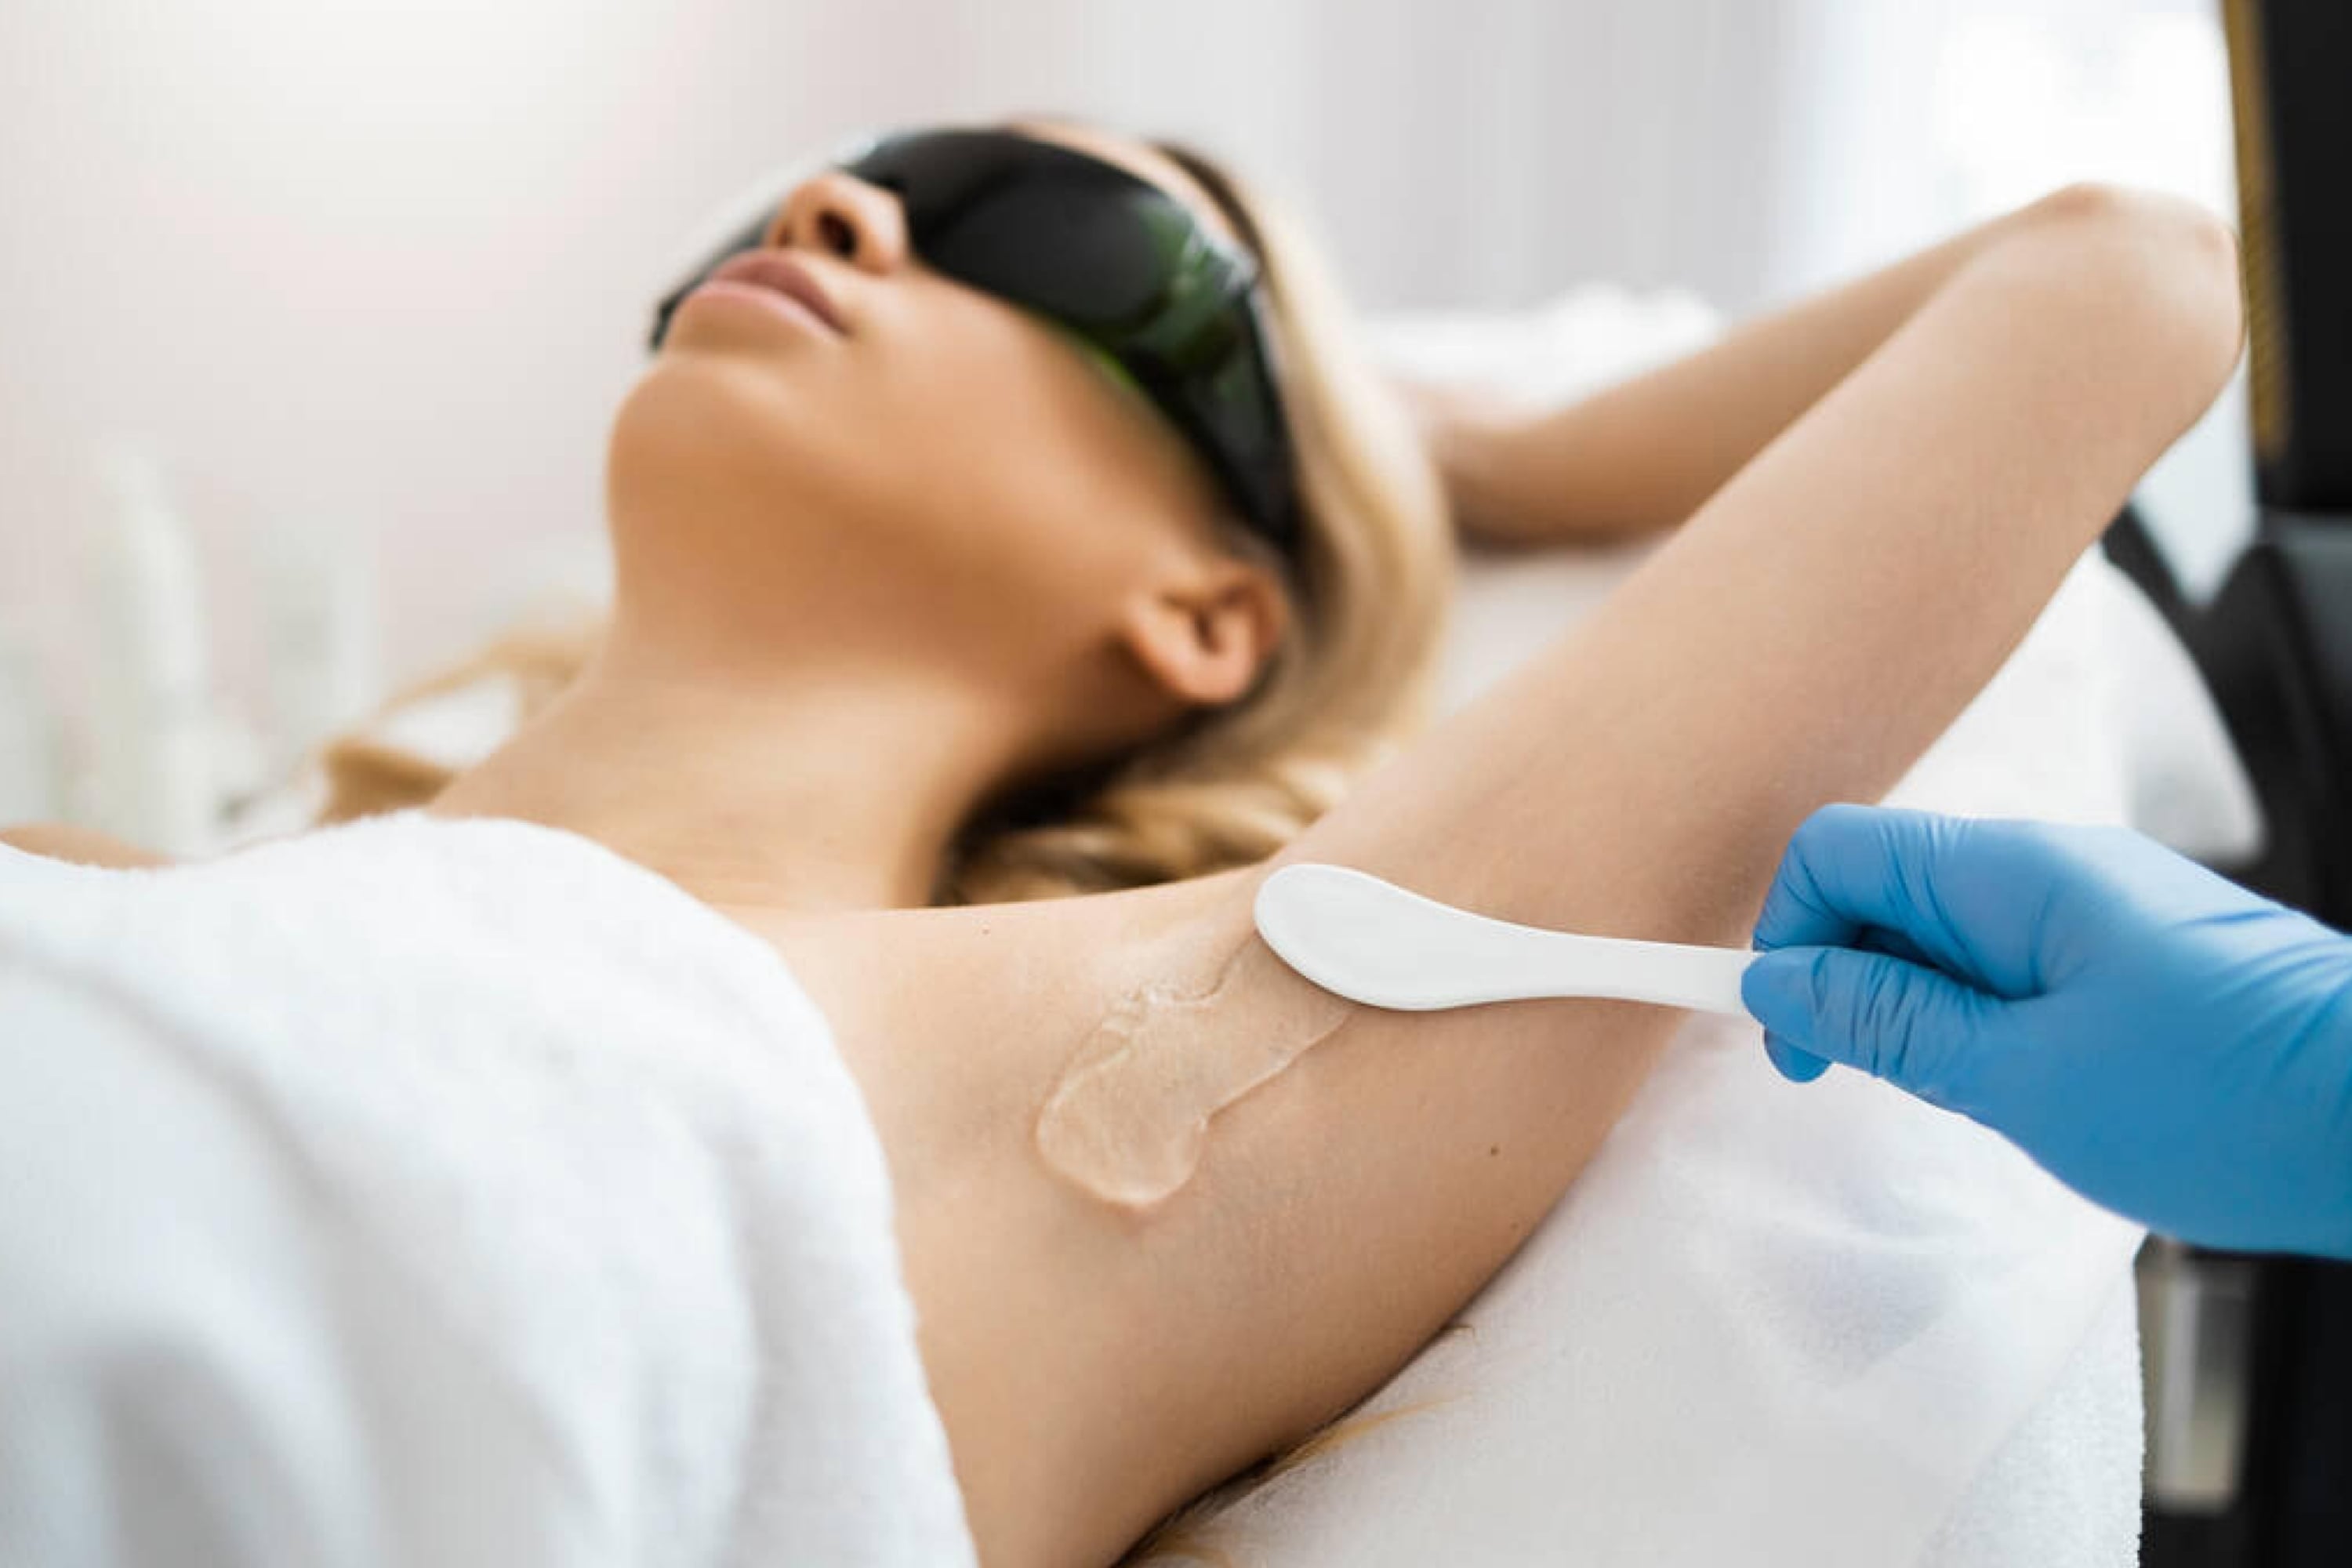 What Is a Small Area For Laser Hair Removal